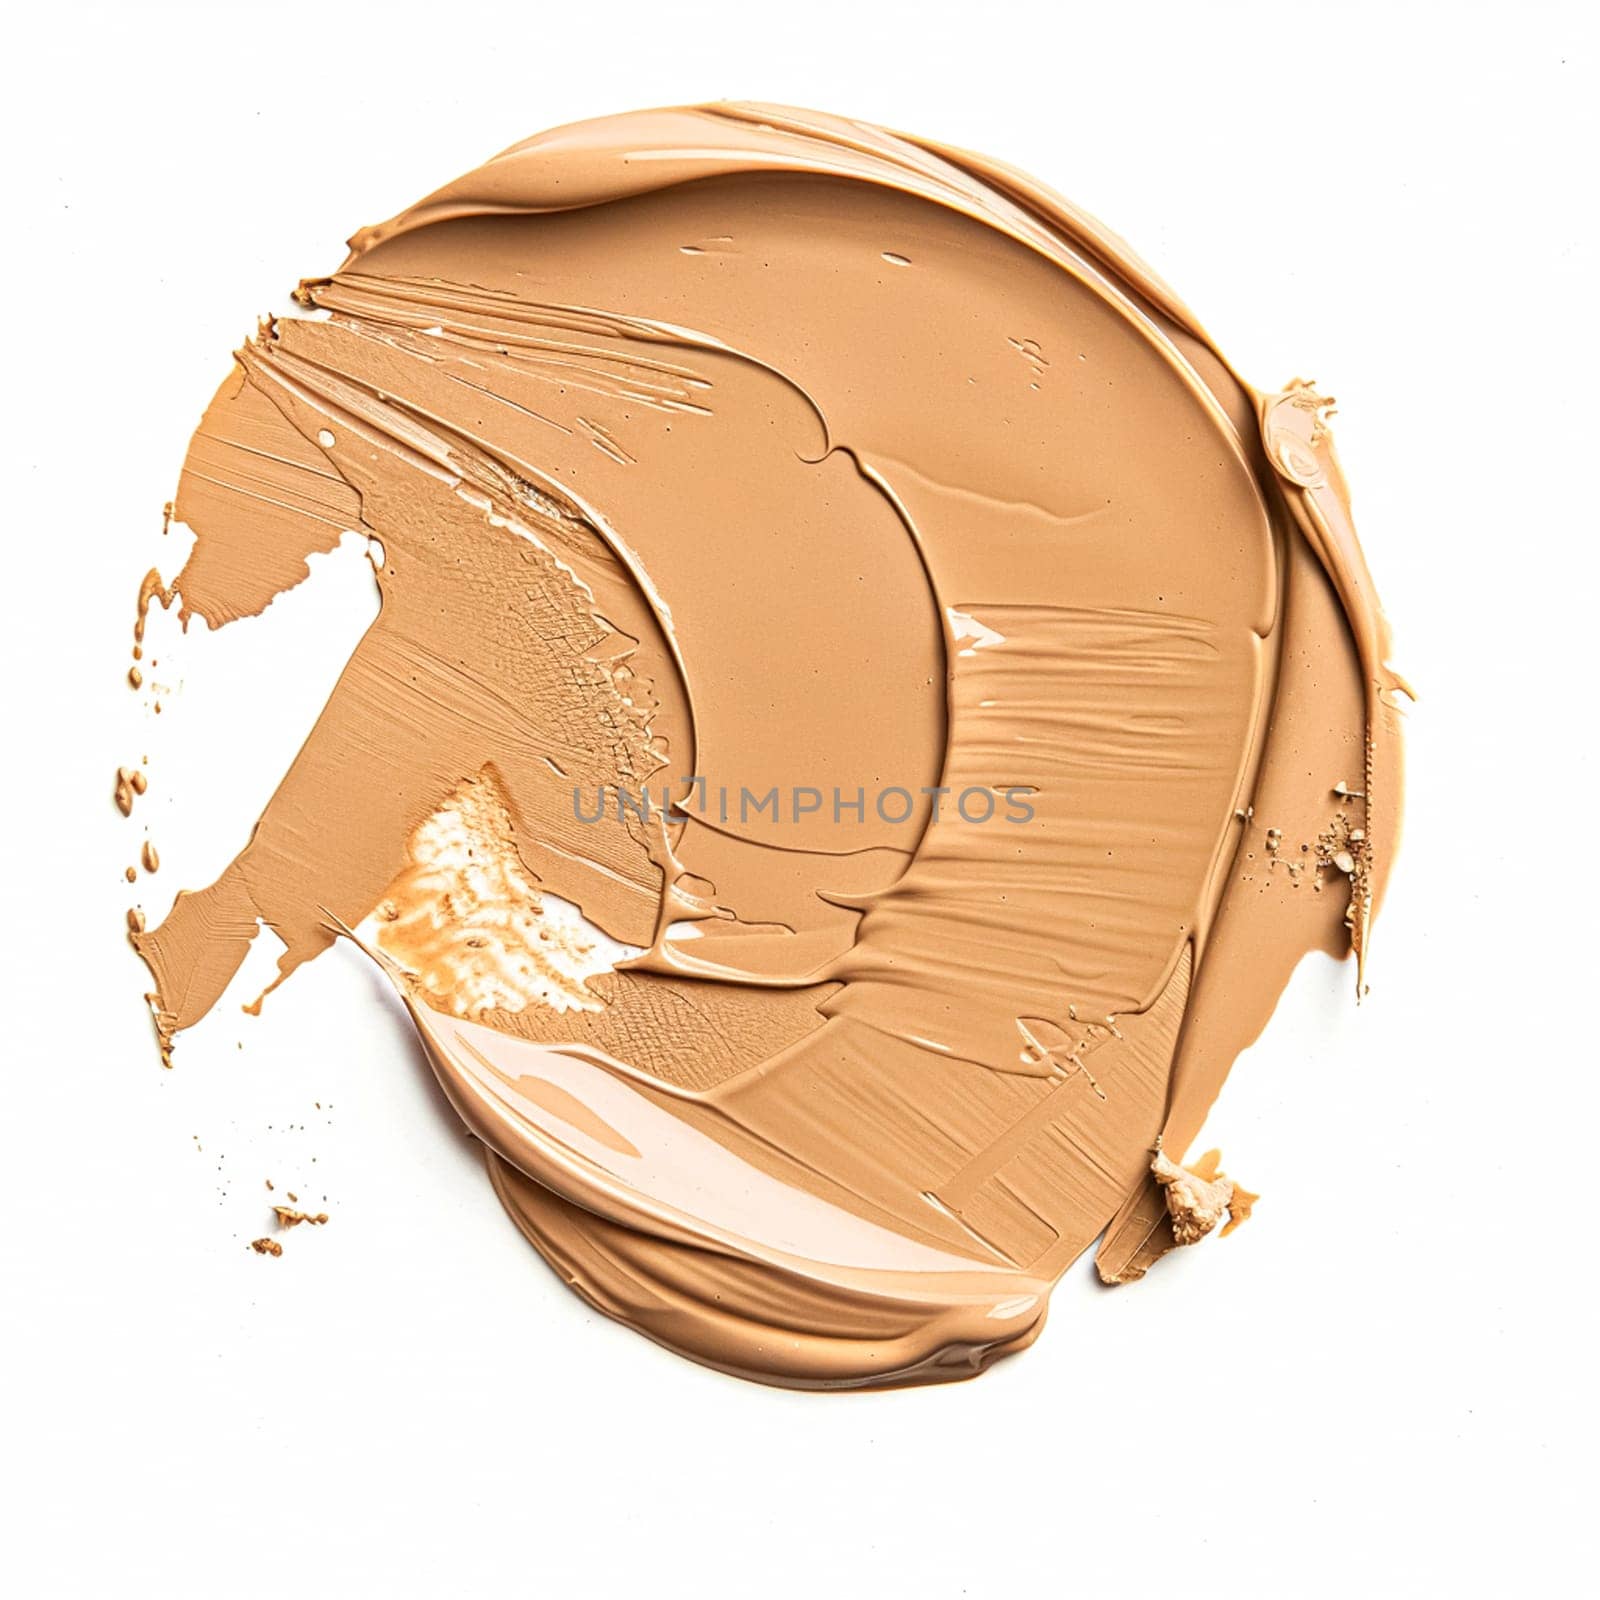 Make-up foundation texture as circle shape design, beauty product and cosmetics, makeup blush eyeshadow powder as abstract luxury cosmetic background art